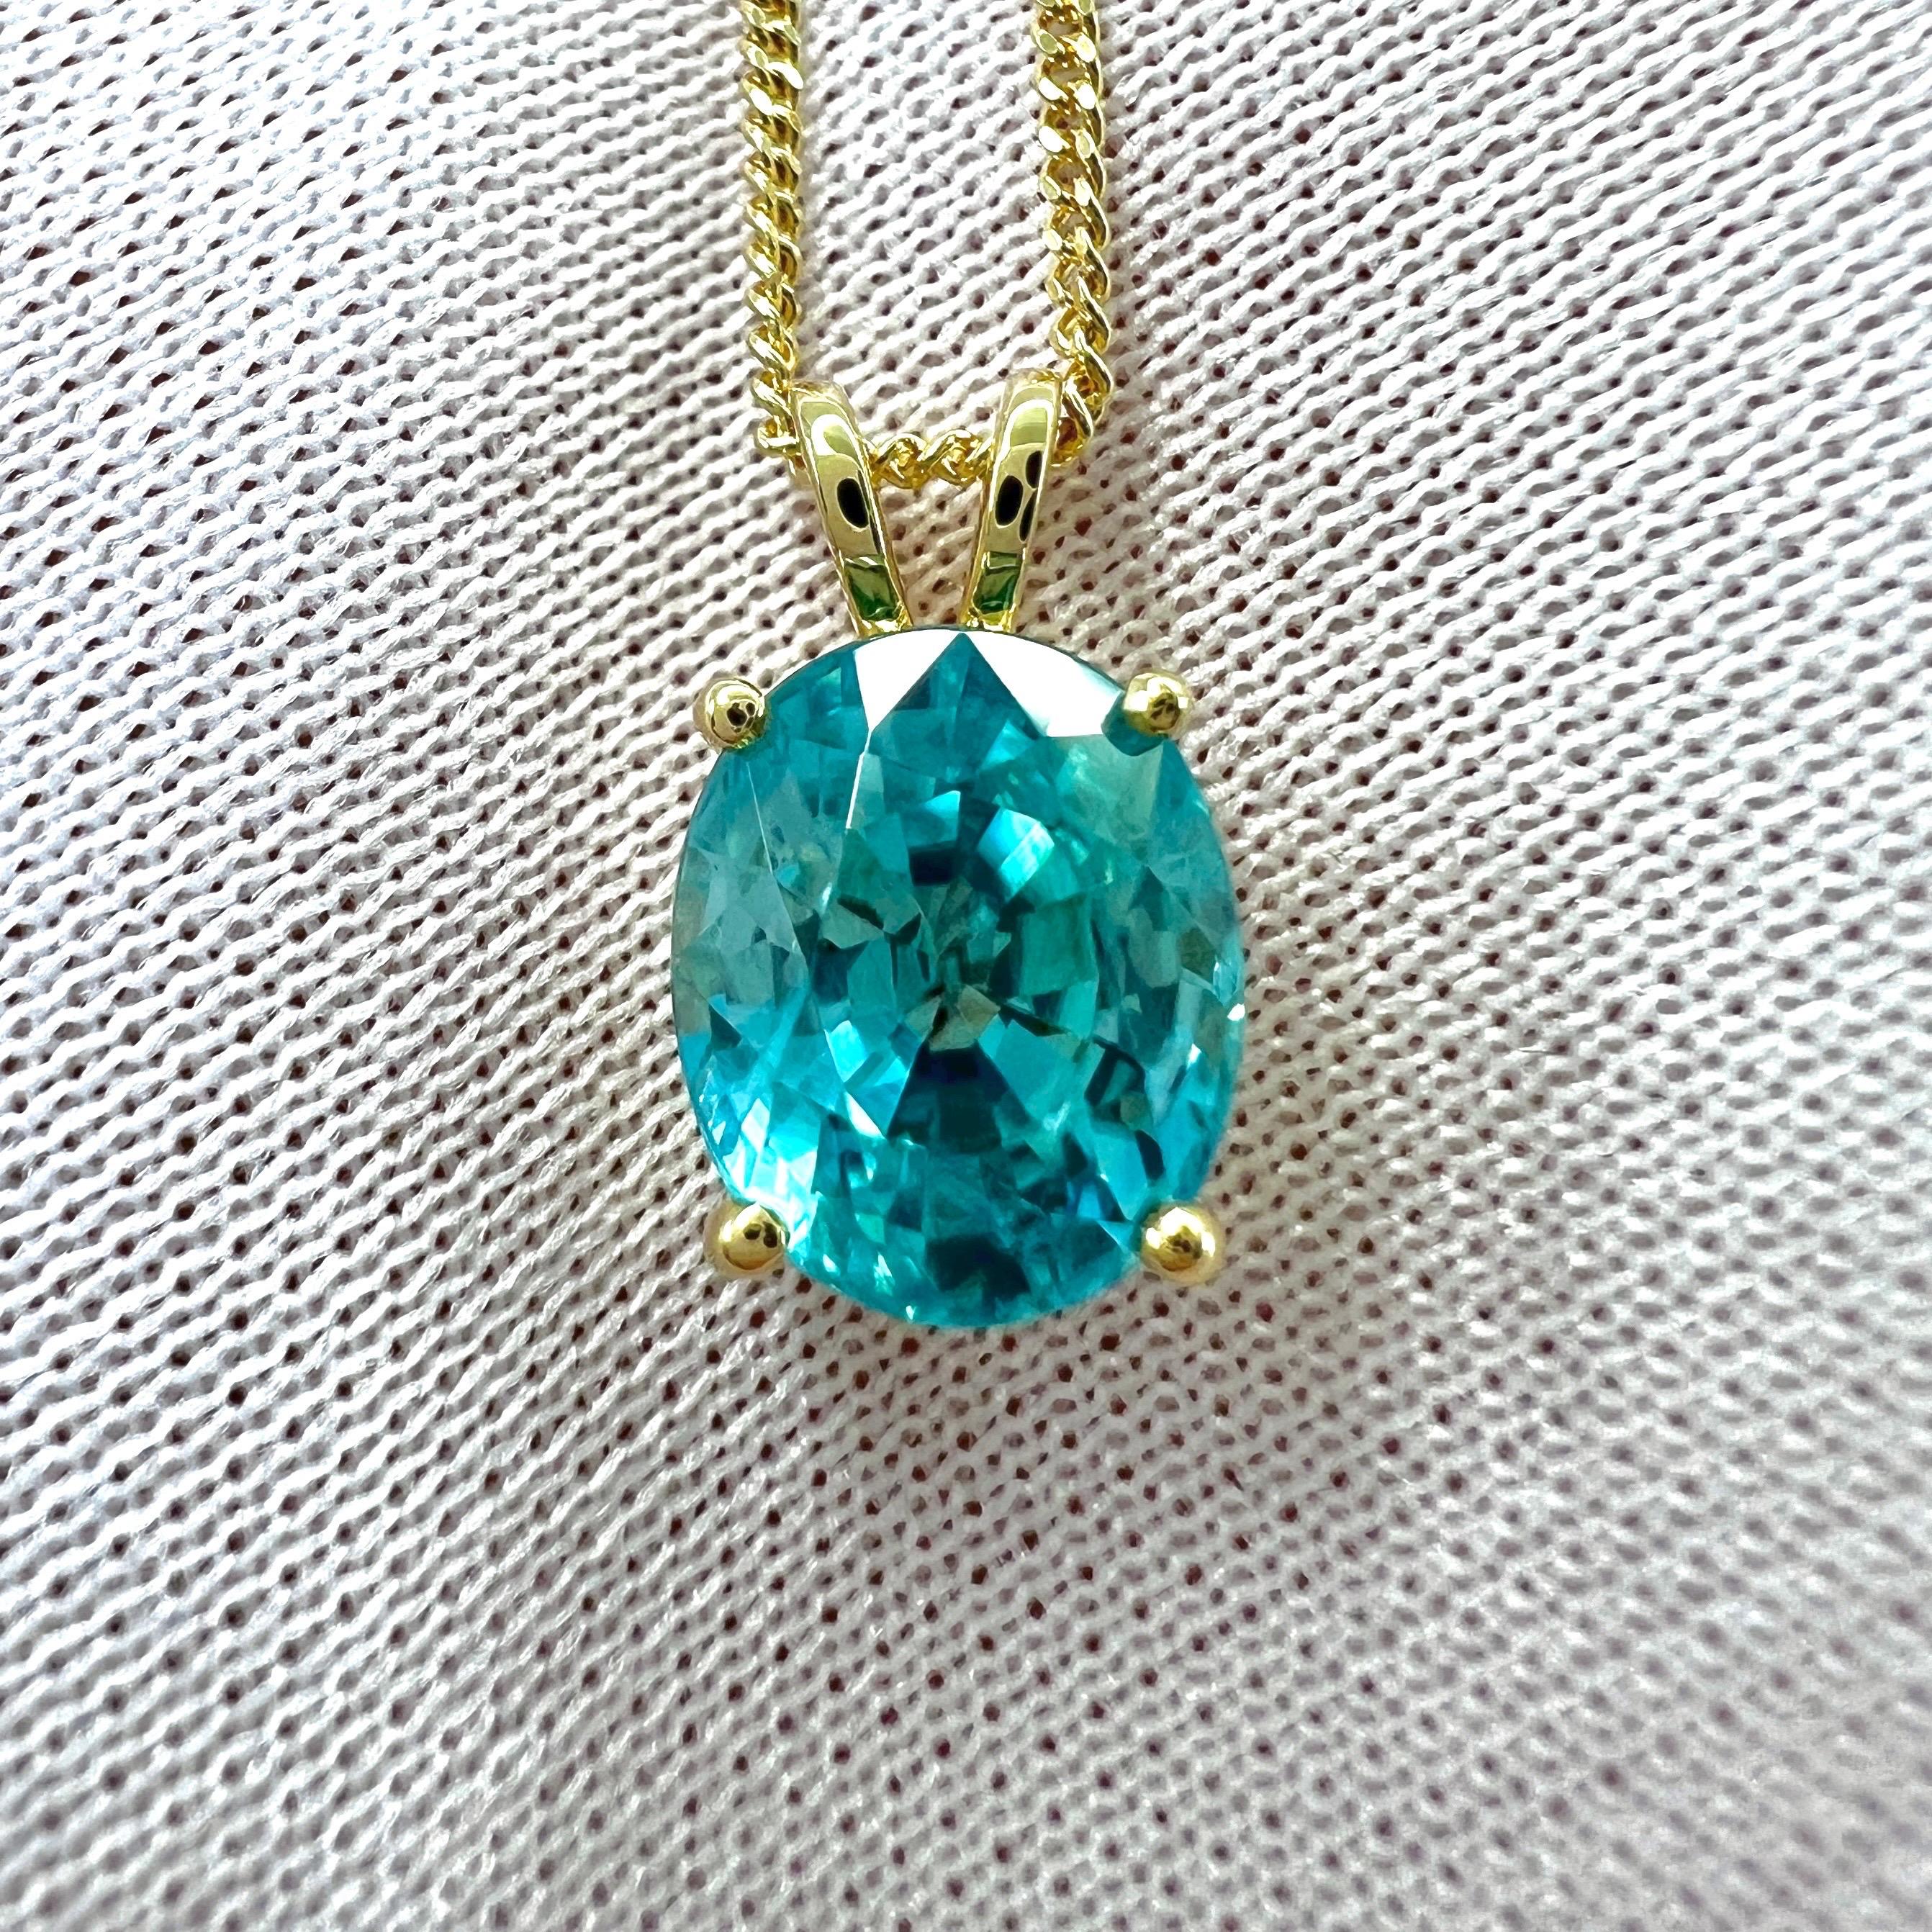 Vivid Neon Blue Oval Cut Natural Zircon 18k Yellow Gold Pendant Necklace.

Stunning 3.78 carat natural blue zircon set in a fine 18k yellow gold solitaire pendant. Stunning blue zircon with a vivid neon blue colour and excellent clarity, very clean